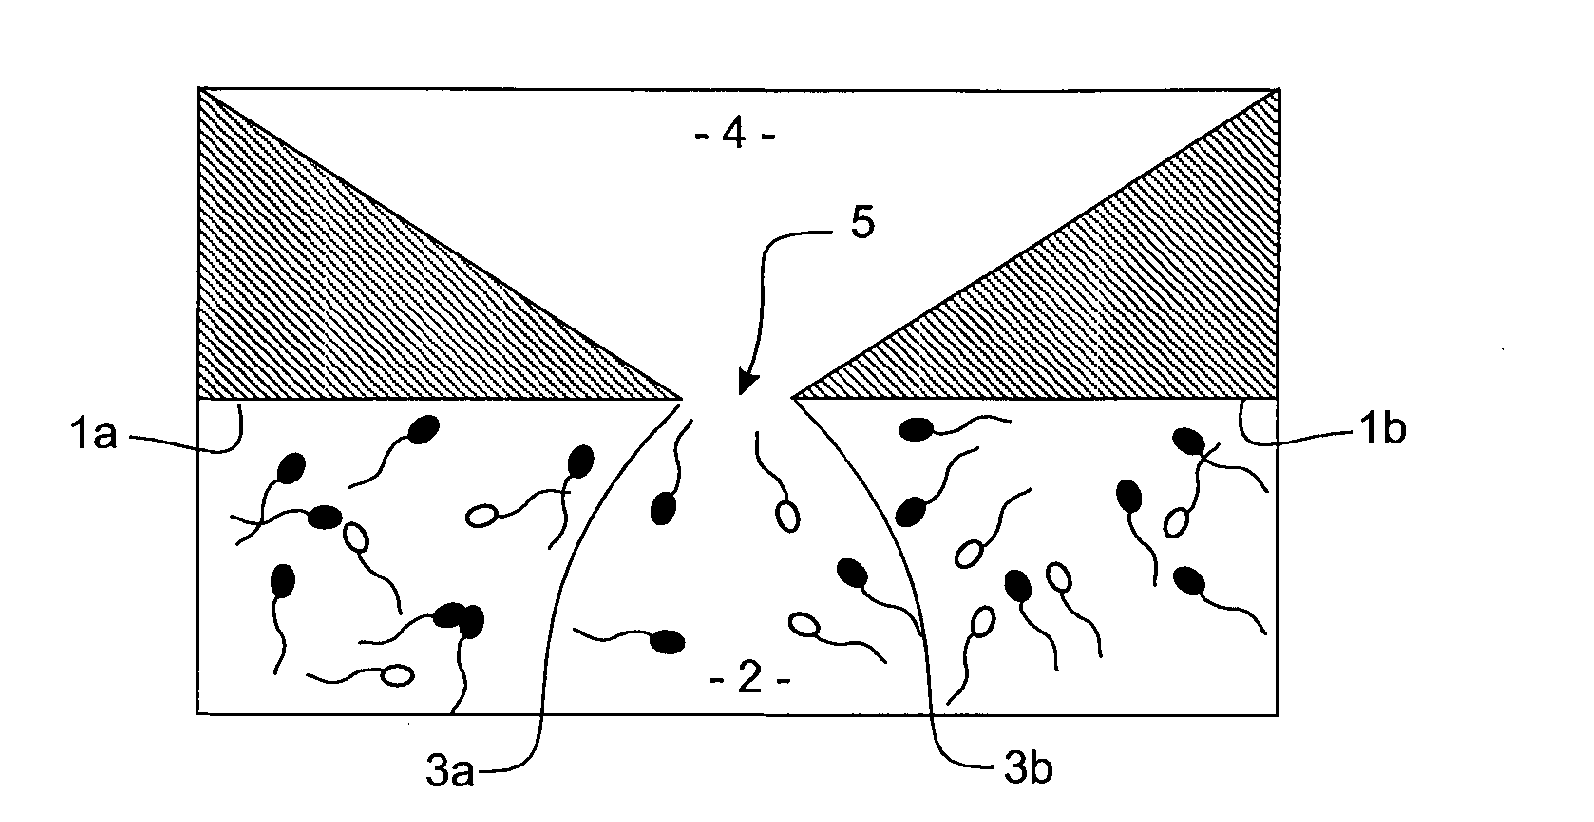 Method and apparatus for the isolation of motile sperm